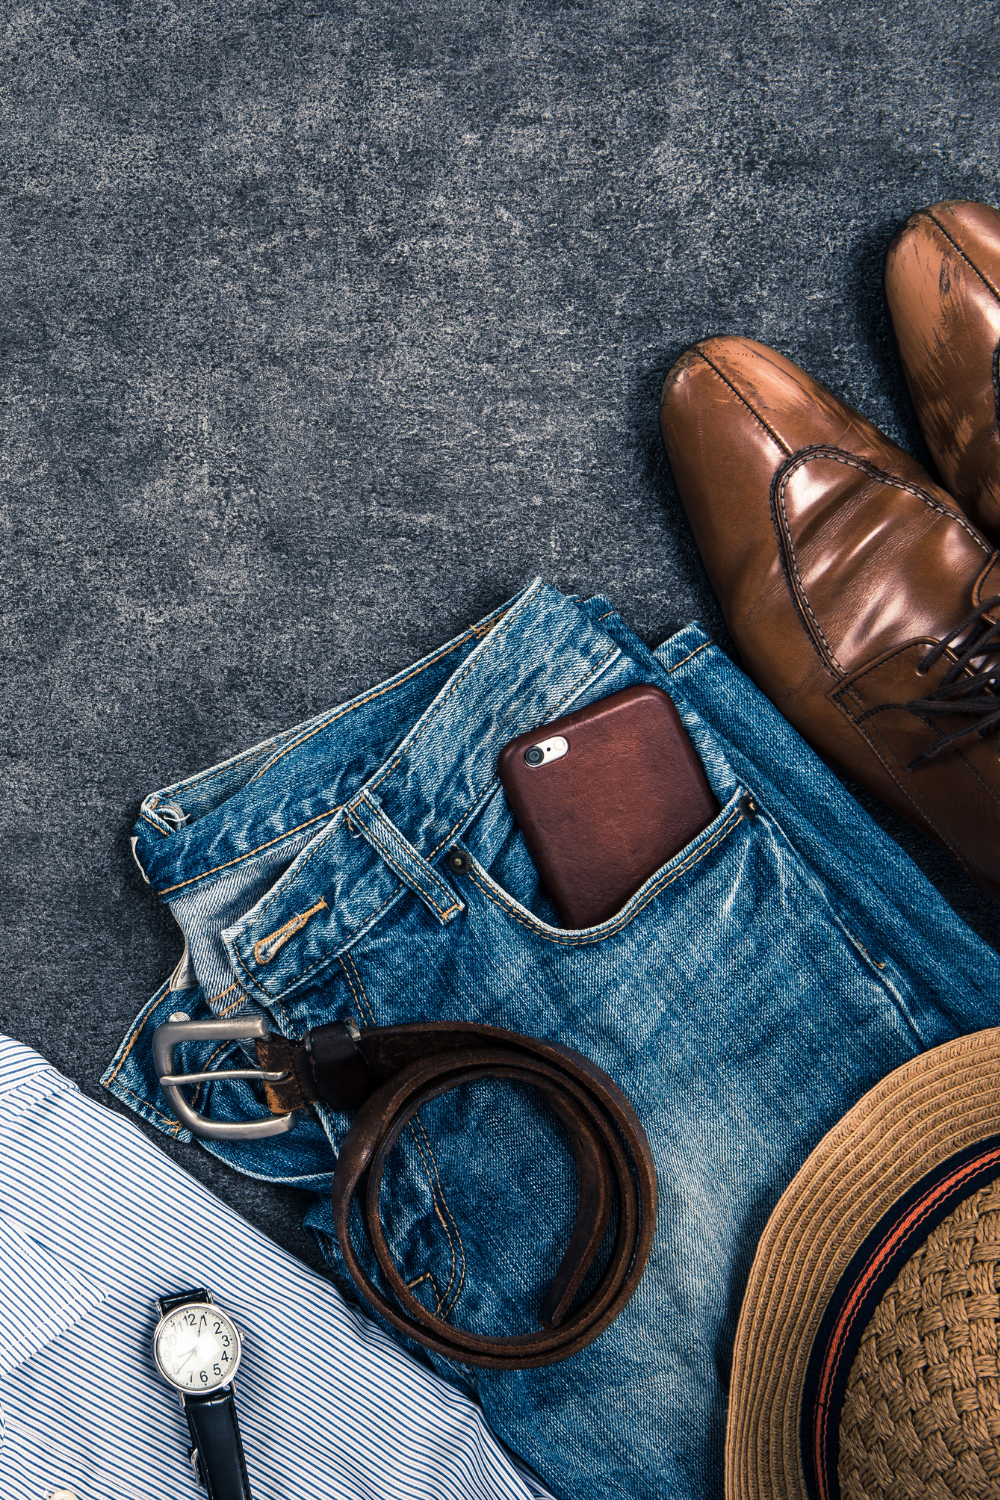 Dressing Tips for Men in 20s and Beyond